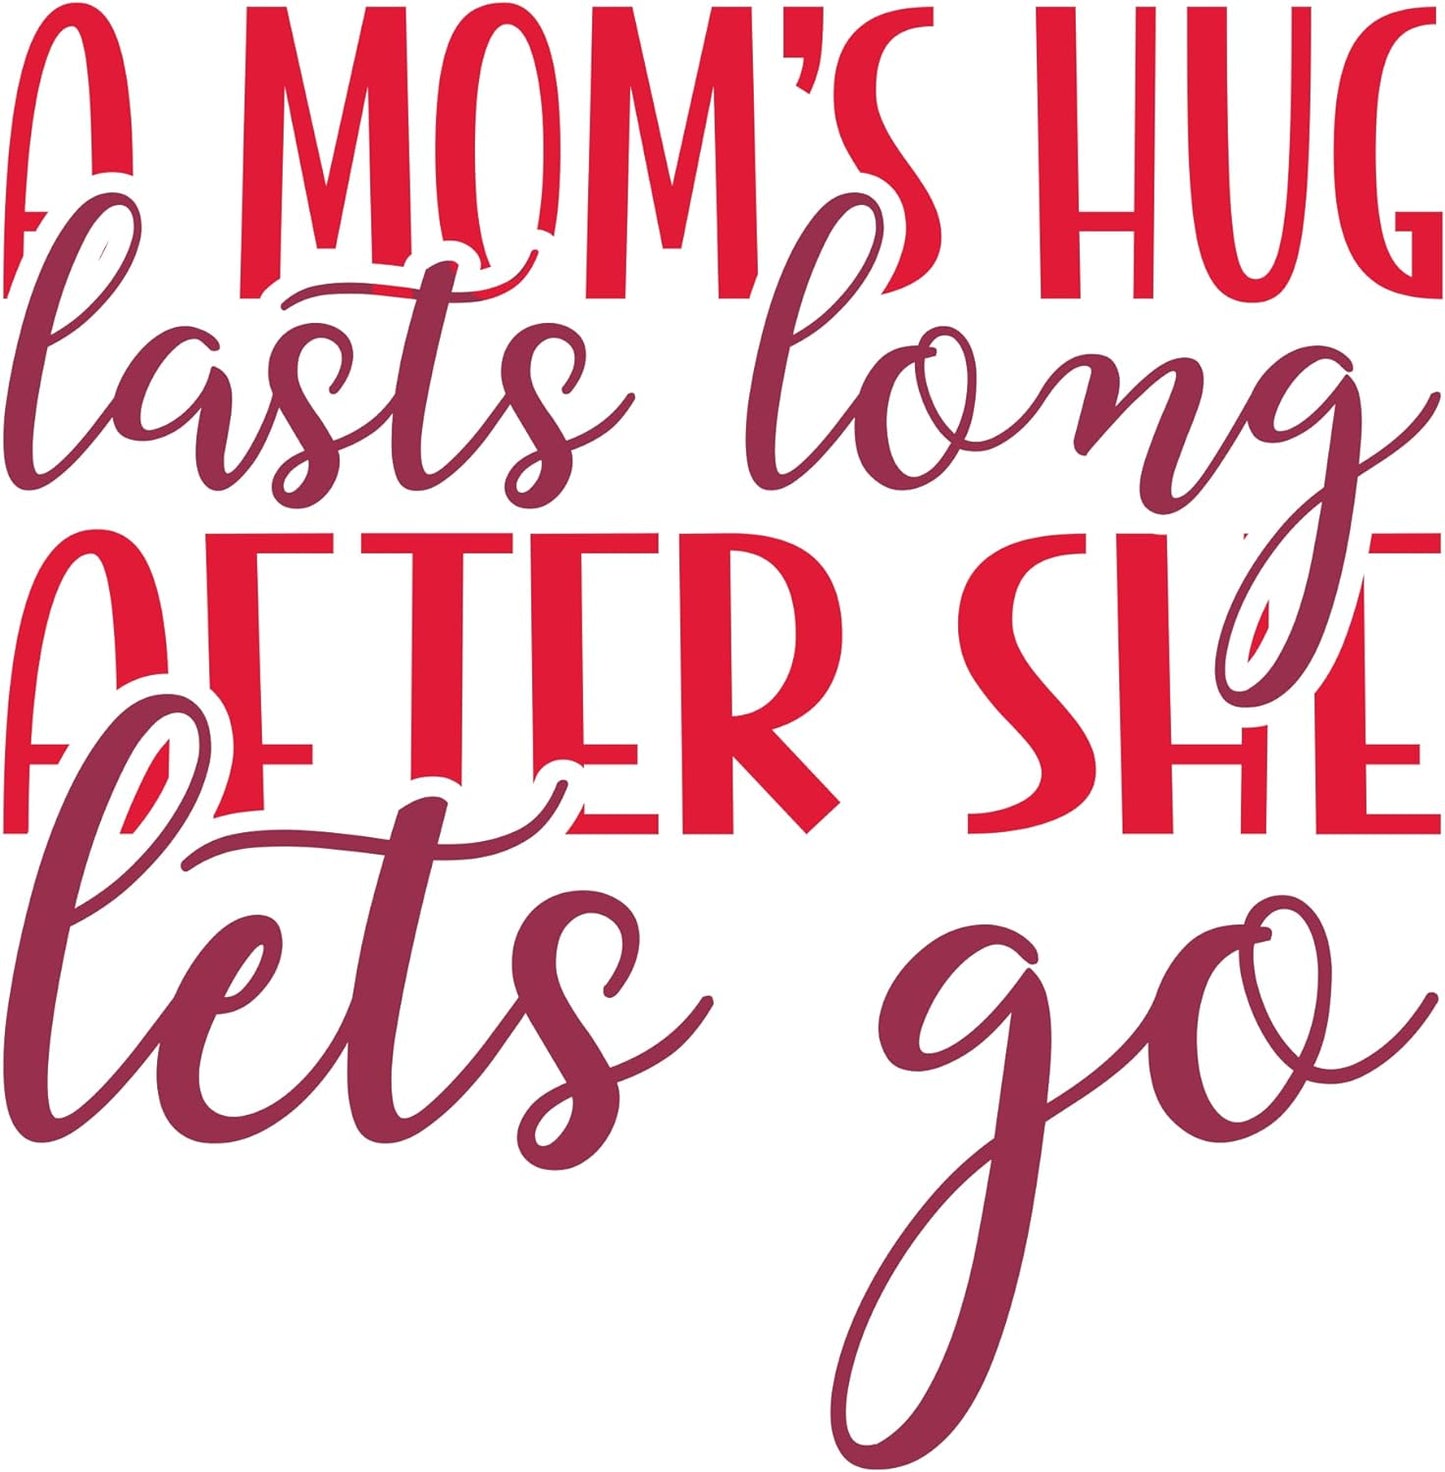 Inspirational Quote "A Mom Hug Lasts Long After She Lets go" Motivational Sticker Vinyl Decal Motivation Stickers- 5" Vinyl Sticker Waterproof